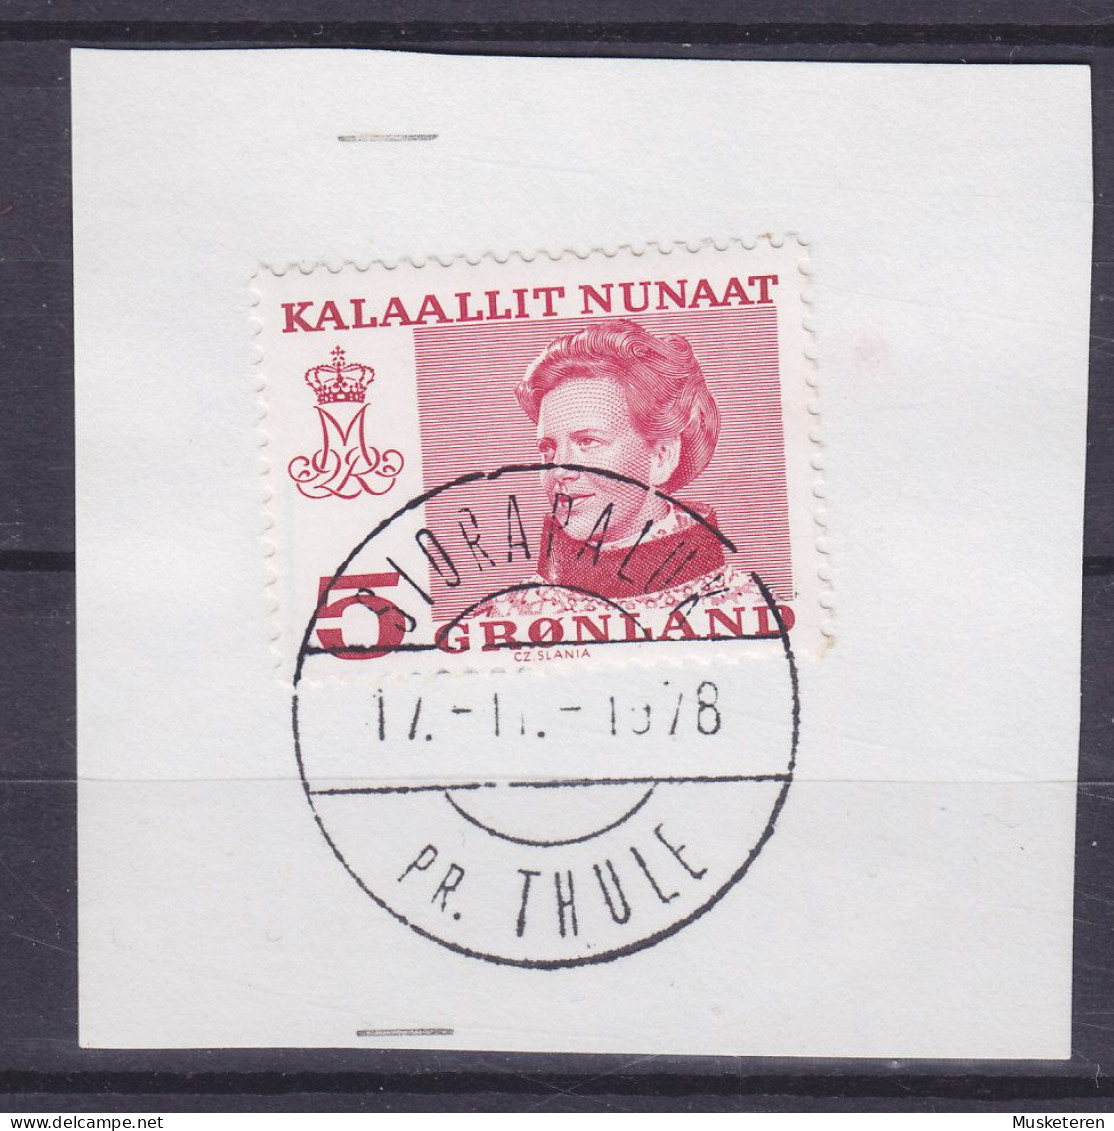 Greenland 1978 Mi. 106, 5 (Ø) Margrethe II. (Cz. Slania) Deluxe Brotype SIORAPALUK Pr. THULE Cancel On Piece !! - Used Stamps